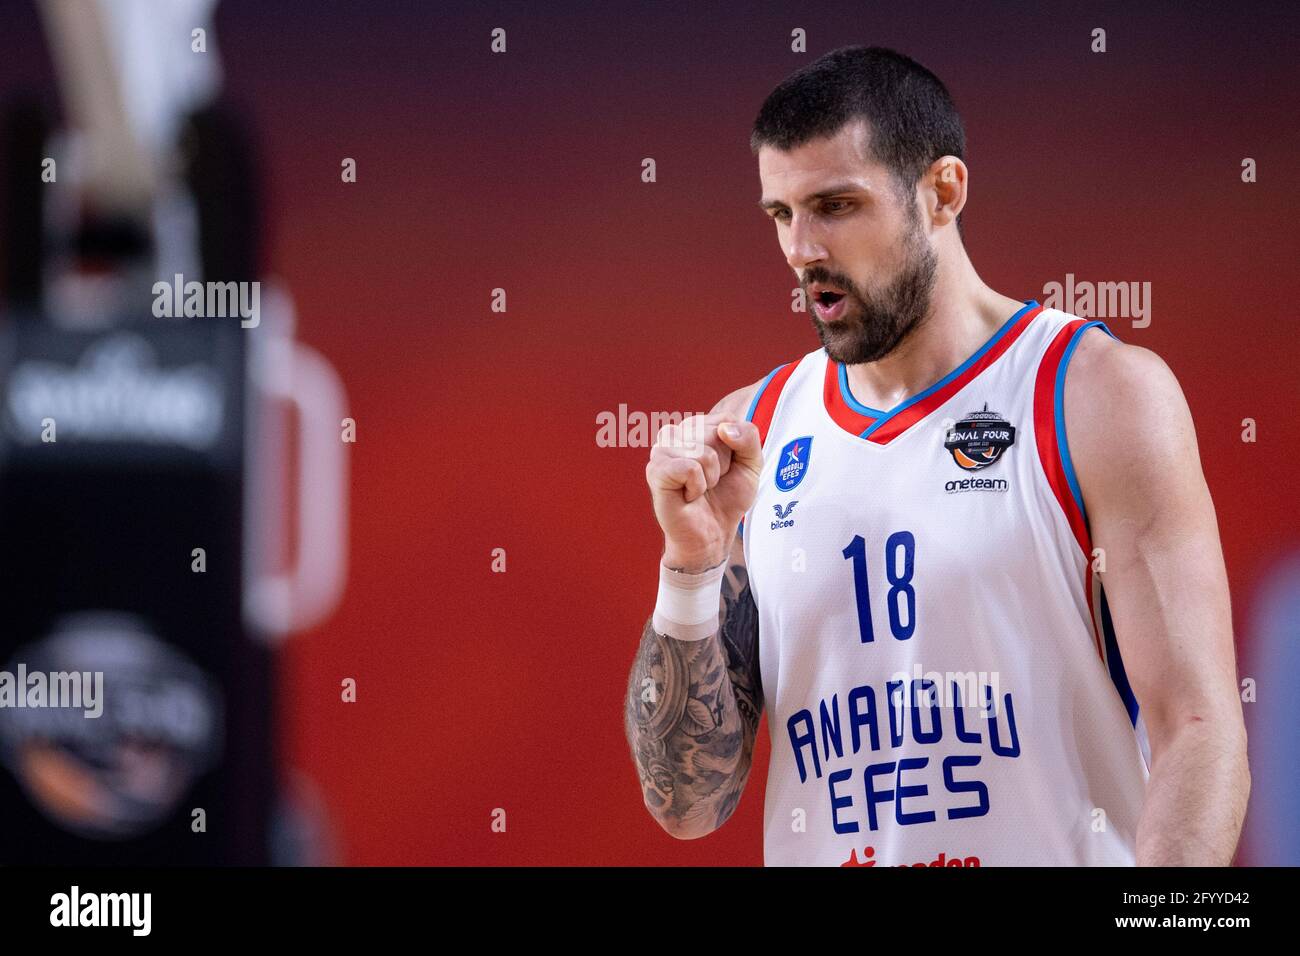 Cologne, Allemagne. 30 mai 2021. Basket-ball: Euroligue, final four, final,  Anadolu Efes Istanbul - FC Barcelone. Adrien Moerman, d'Istanbul, clame son  poing pendant le match. Credit: Marius Becker/dpa/Alay Live News Photo  Stock -